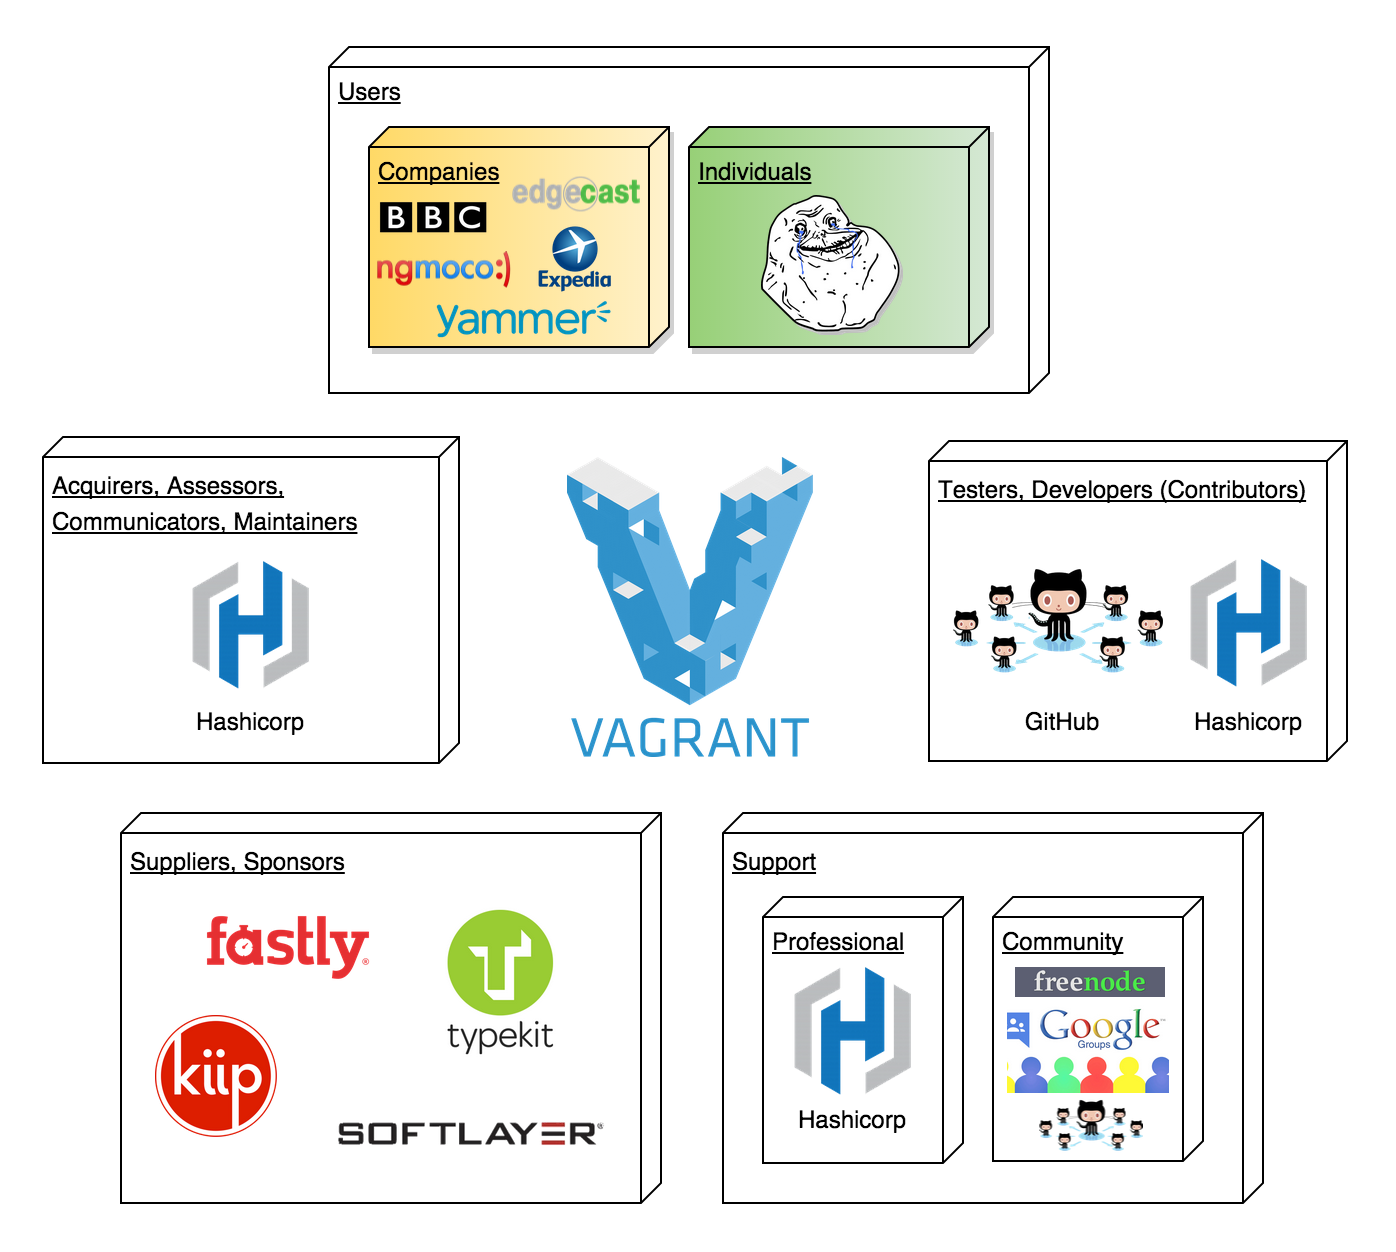 _Types of stakeholders for Vagrant_